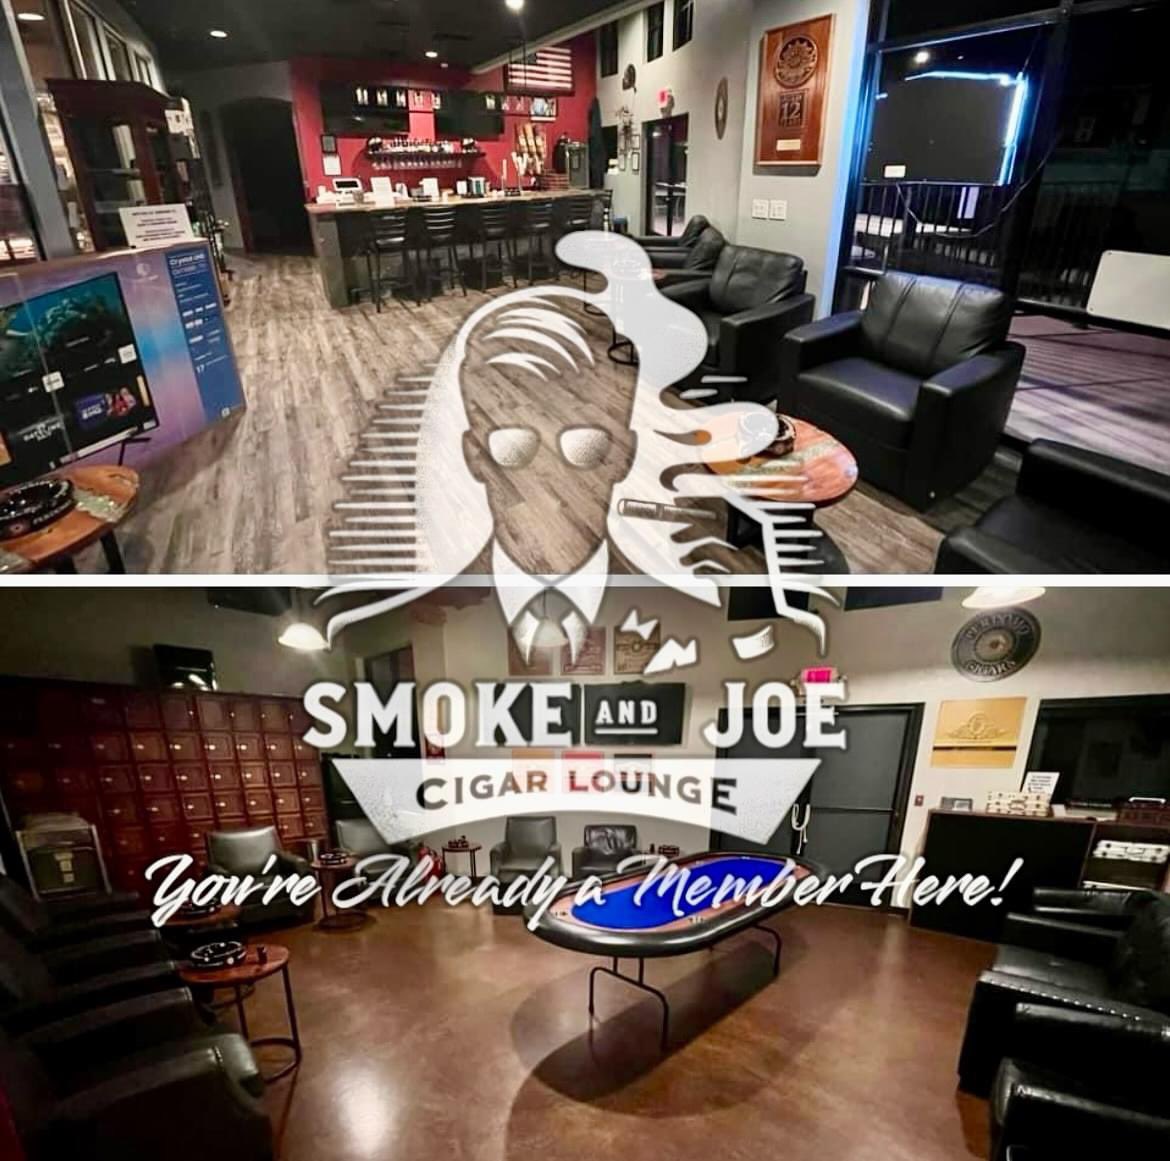 smokeandjoecigarlounge.com ➡️➡️Have you enjoyed our lounge and relaxed with your favorite beverage lately? Don’t let the heat stop you. The AC works quite well in here! #CaveCreek #CaveCreekArizona #CaveCreekAZ #Phoenix #PhoenixArizona #PhoenixAZ #Scottsdale #ScottsdaleArizona…